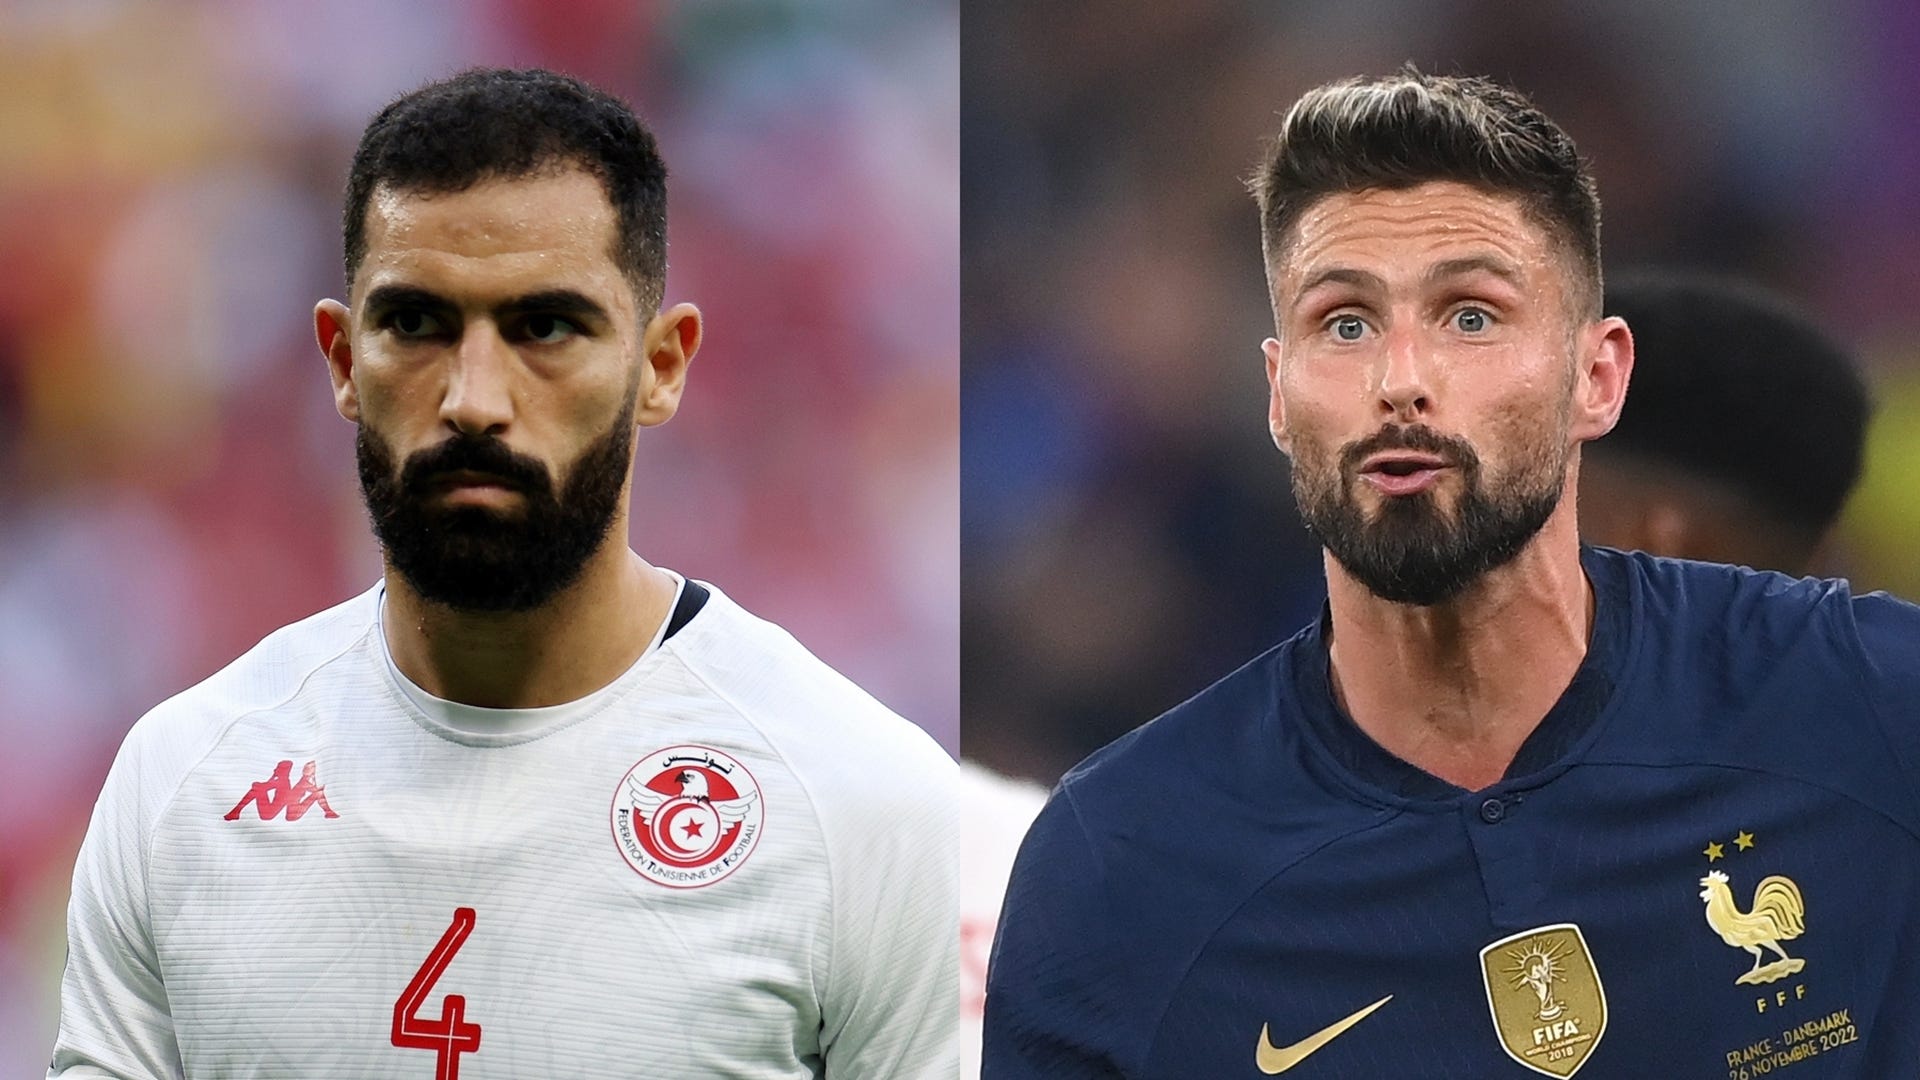 Tunisia vs France Live stream, TV channel, kick-off time and where to watch Goal US